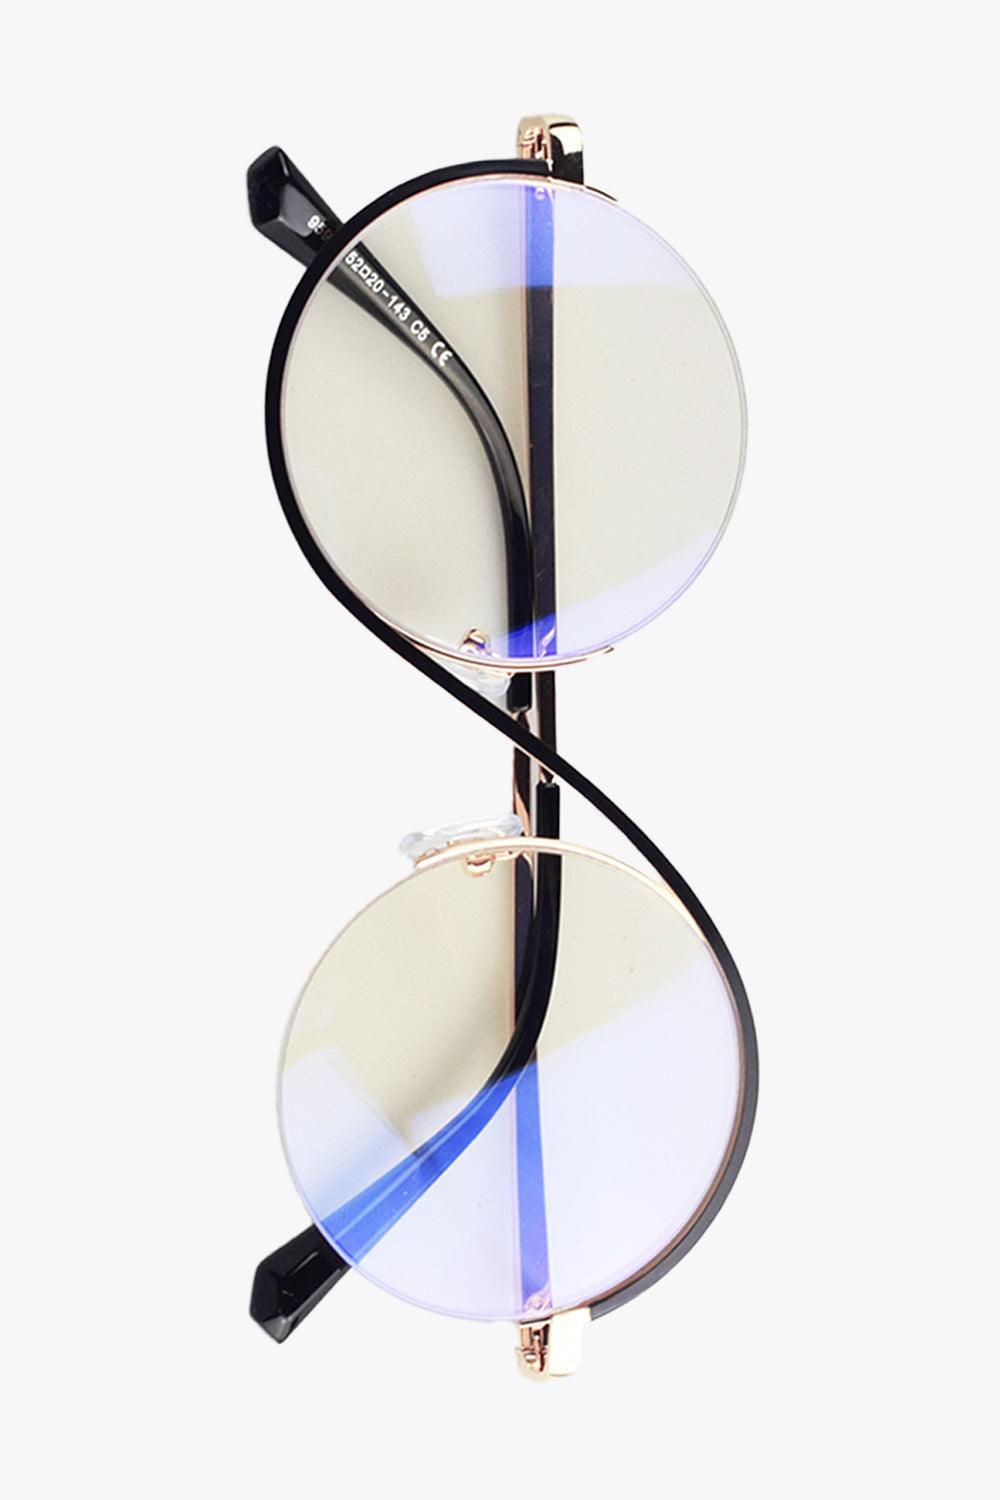 S Frame Curved Round Glasses - Aesthetic Clothes Shop